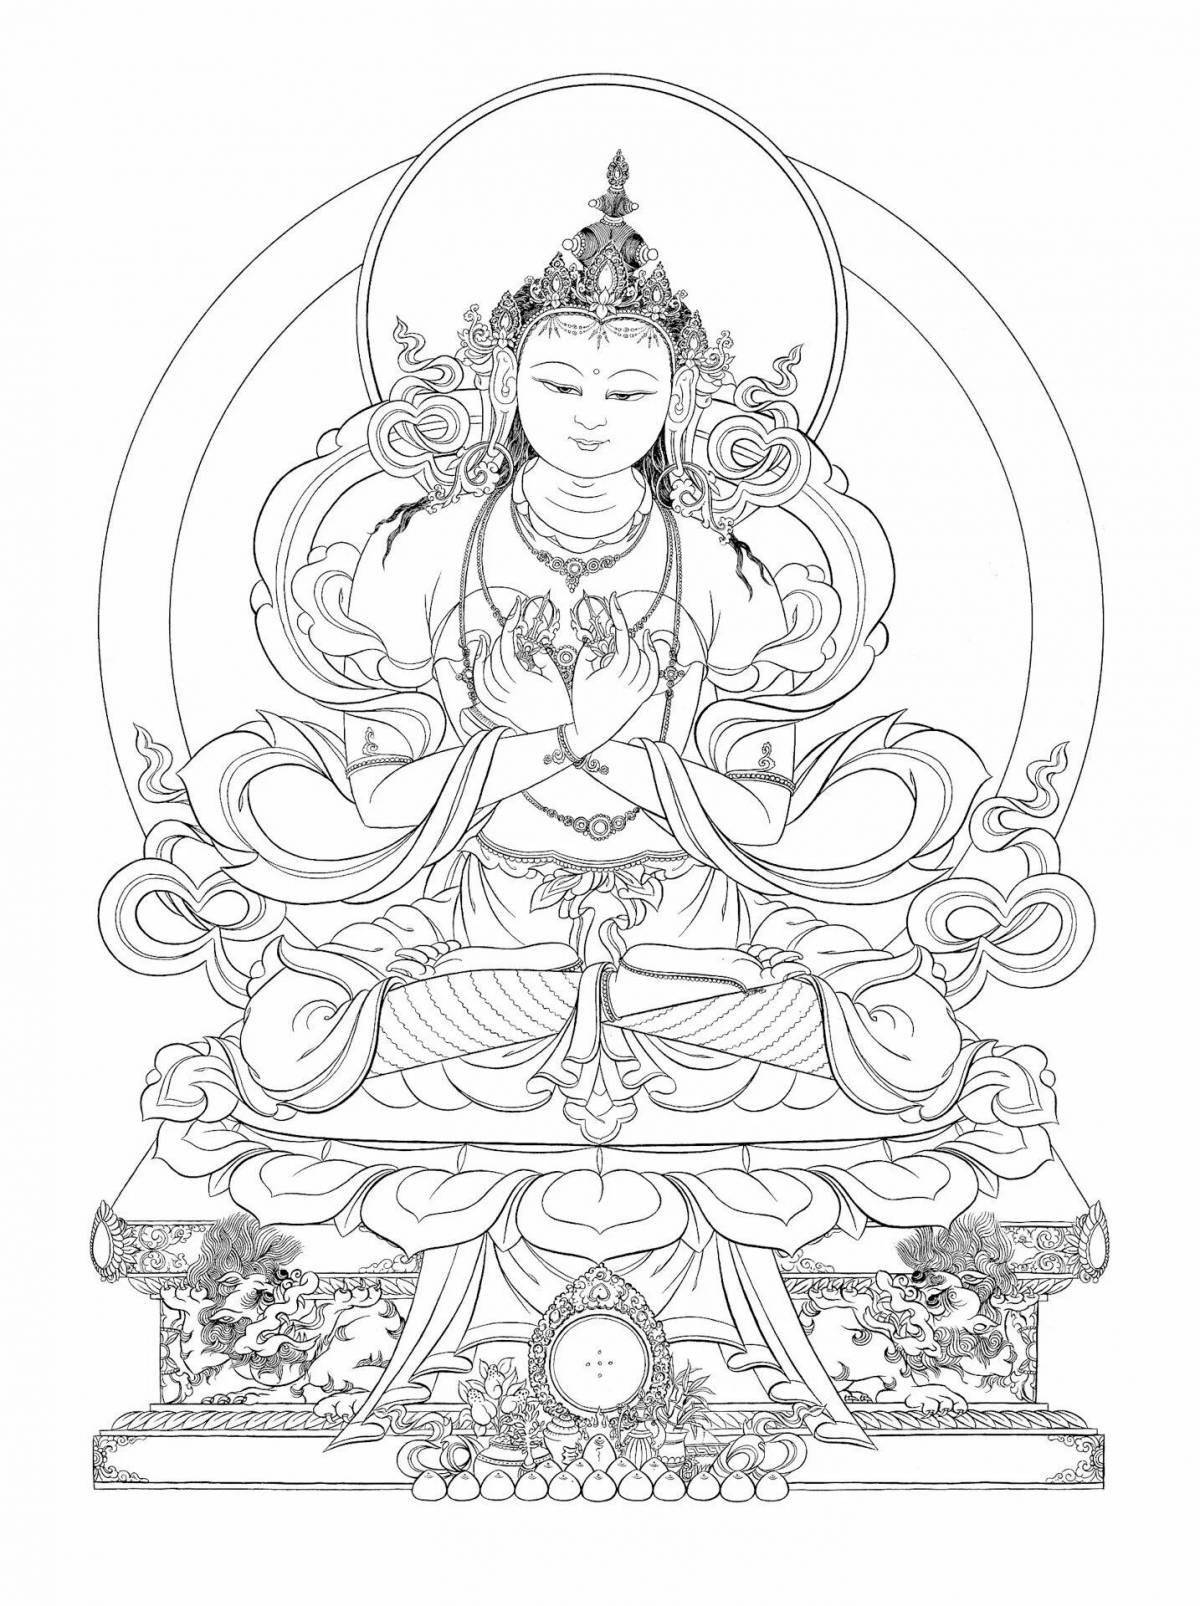 Exalted buddha coloring book